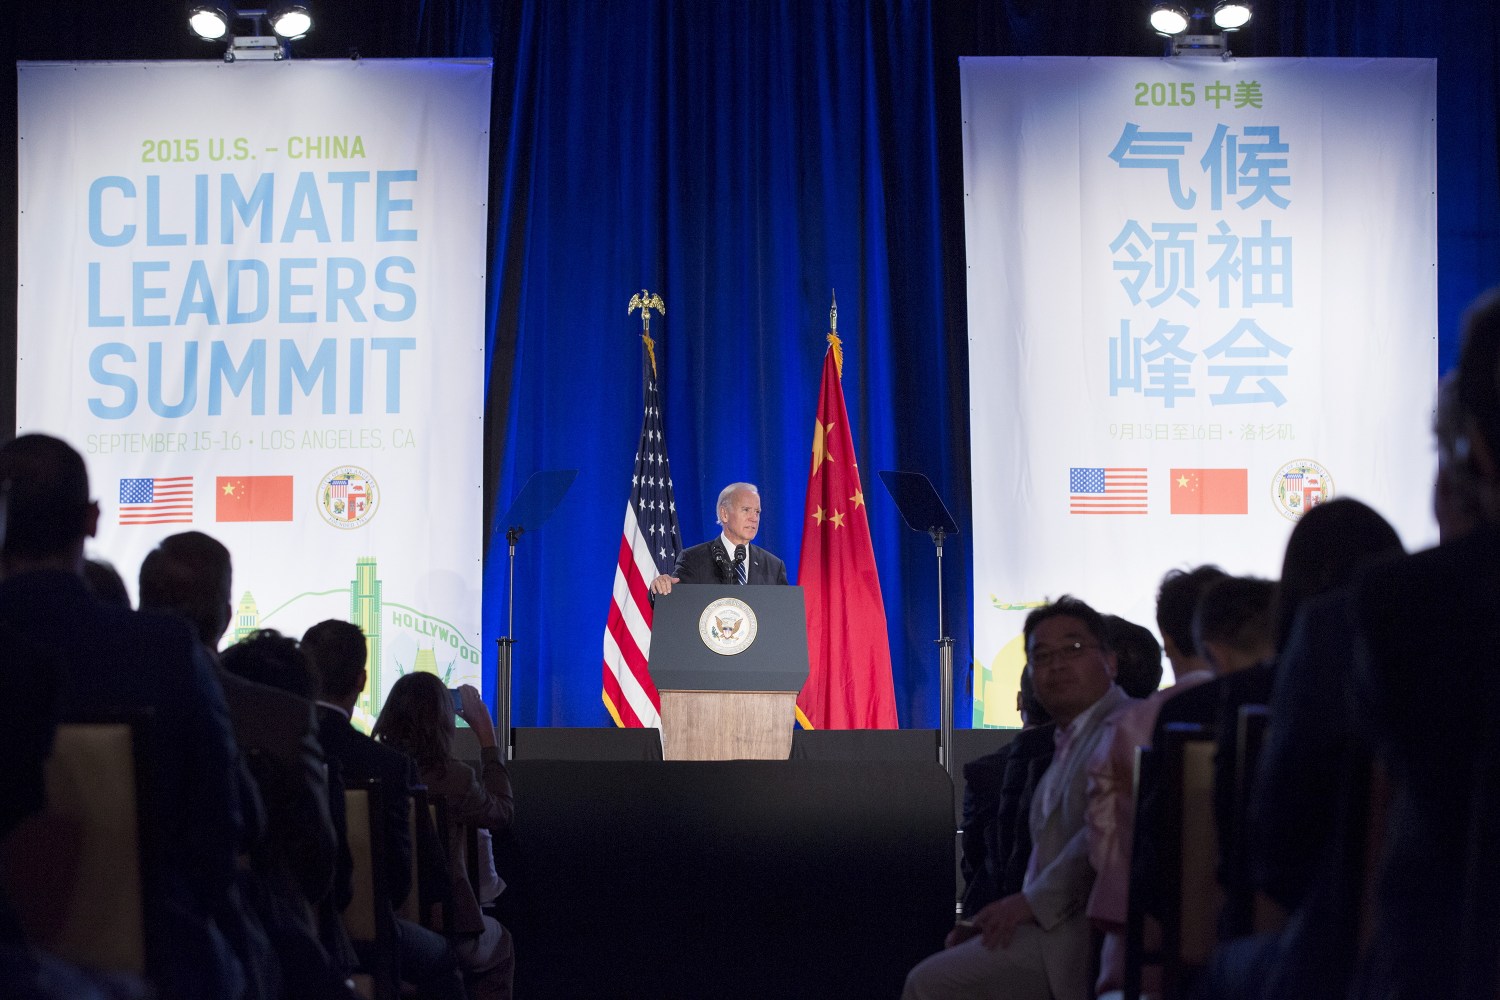 Vice President Joe Biden speaks at the closing session of the US-China Climate Leaders Summit in Los Angeles, California September 16, 2015. Biden's journey to a decision on whether to run for president is taking him this week to California, Michigan, and Ohio -- critical states for fundraising and electoral recognition if he decides to jump in the race.  REUTERS/Jonathan Alcorn